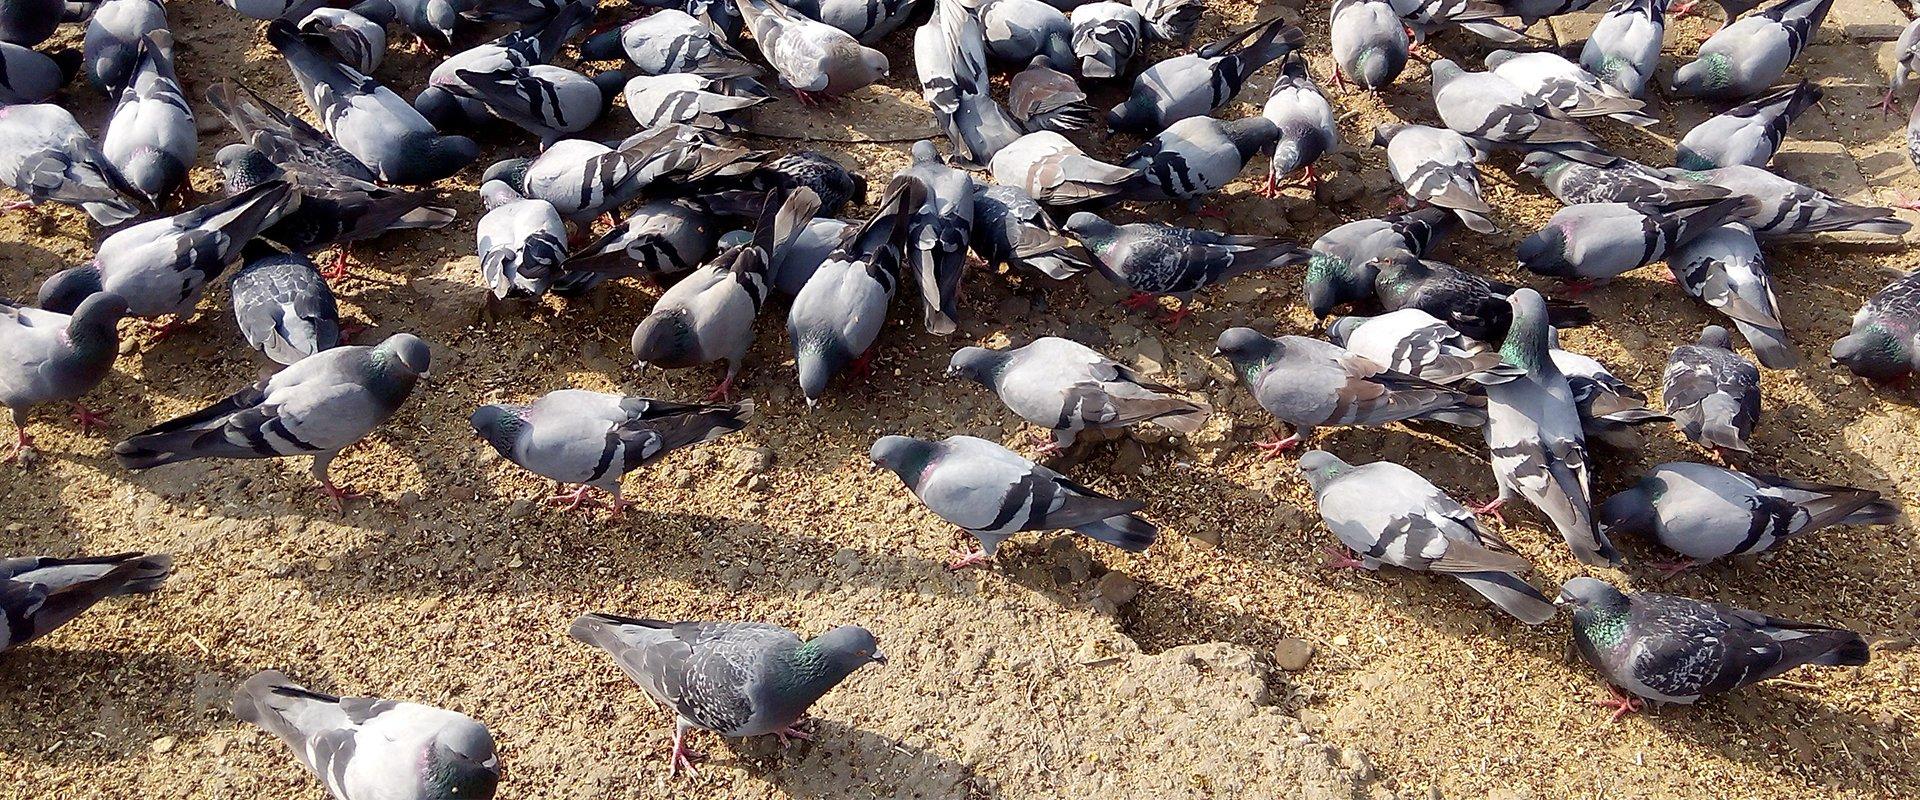 a large gathering of pigeons